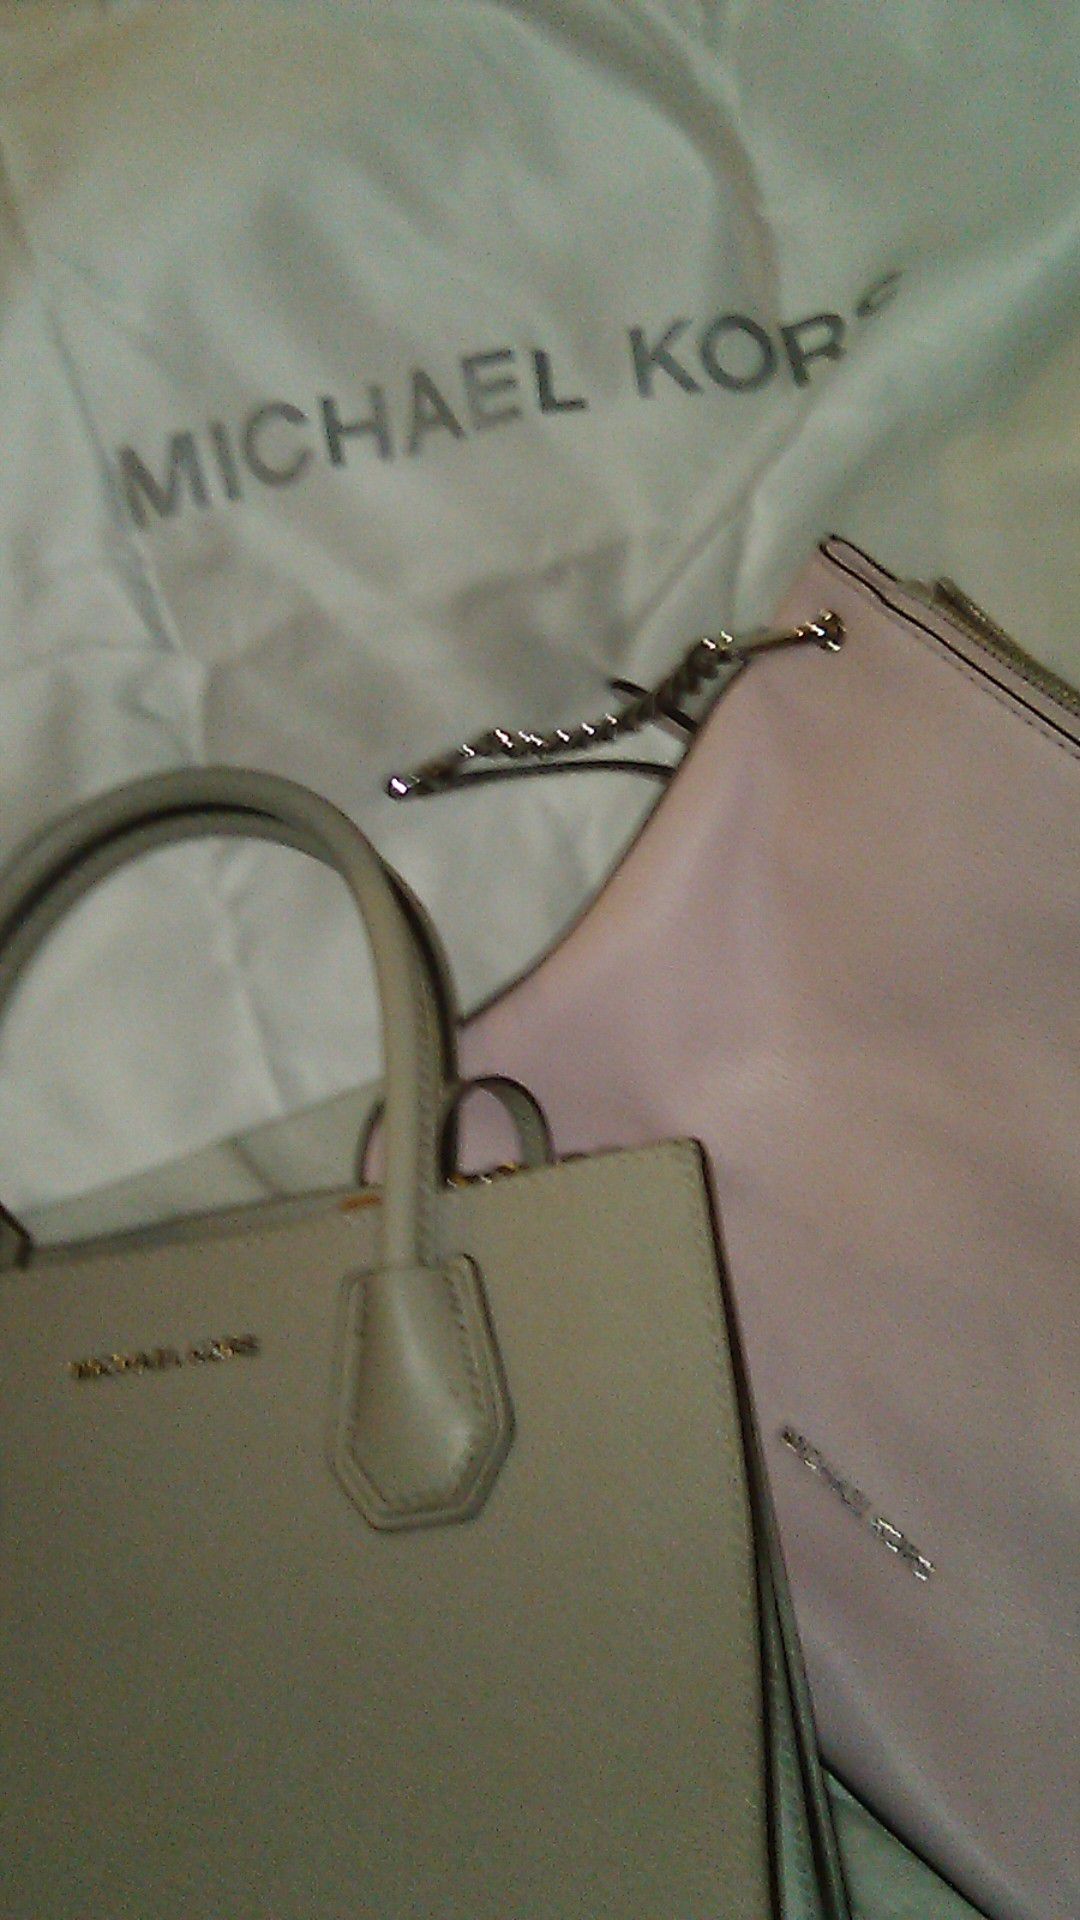 Michael Kors hand bags and carrying tote.